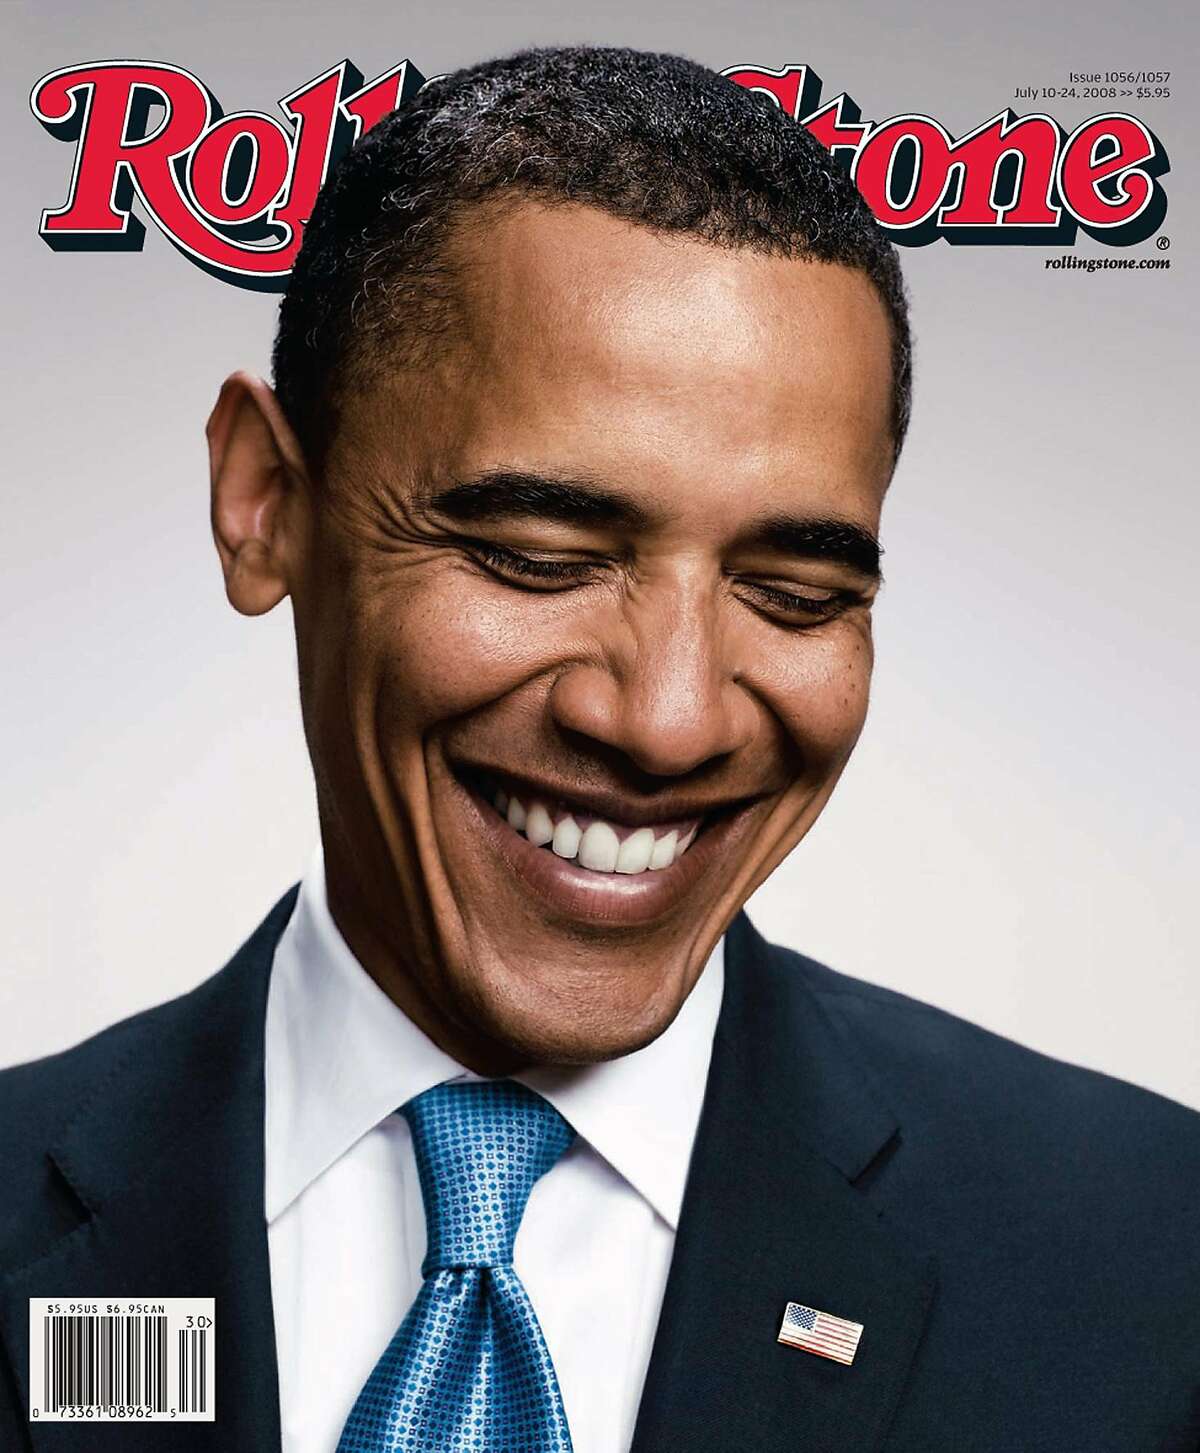 MAGAZINE COVER -- This undated handout photo provided by Rolling Stone Magazine shows the cover July 10 cover of the magazine featuring Democratic presidential candidate Sen. Barack Obama, D-Ill. promoting the magazines interview with Sen. Obama. (AP Photo/Rolling Stone)